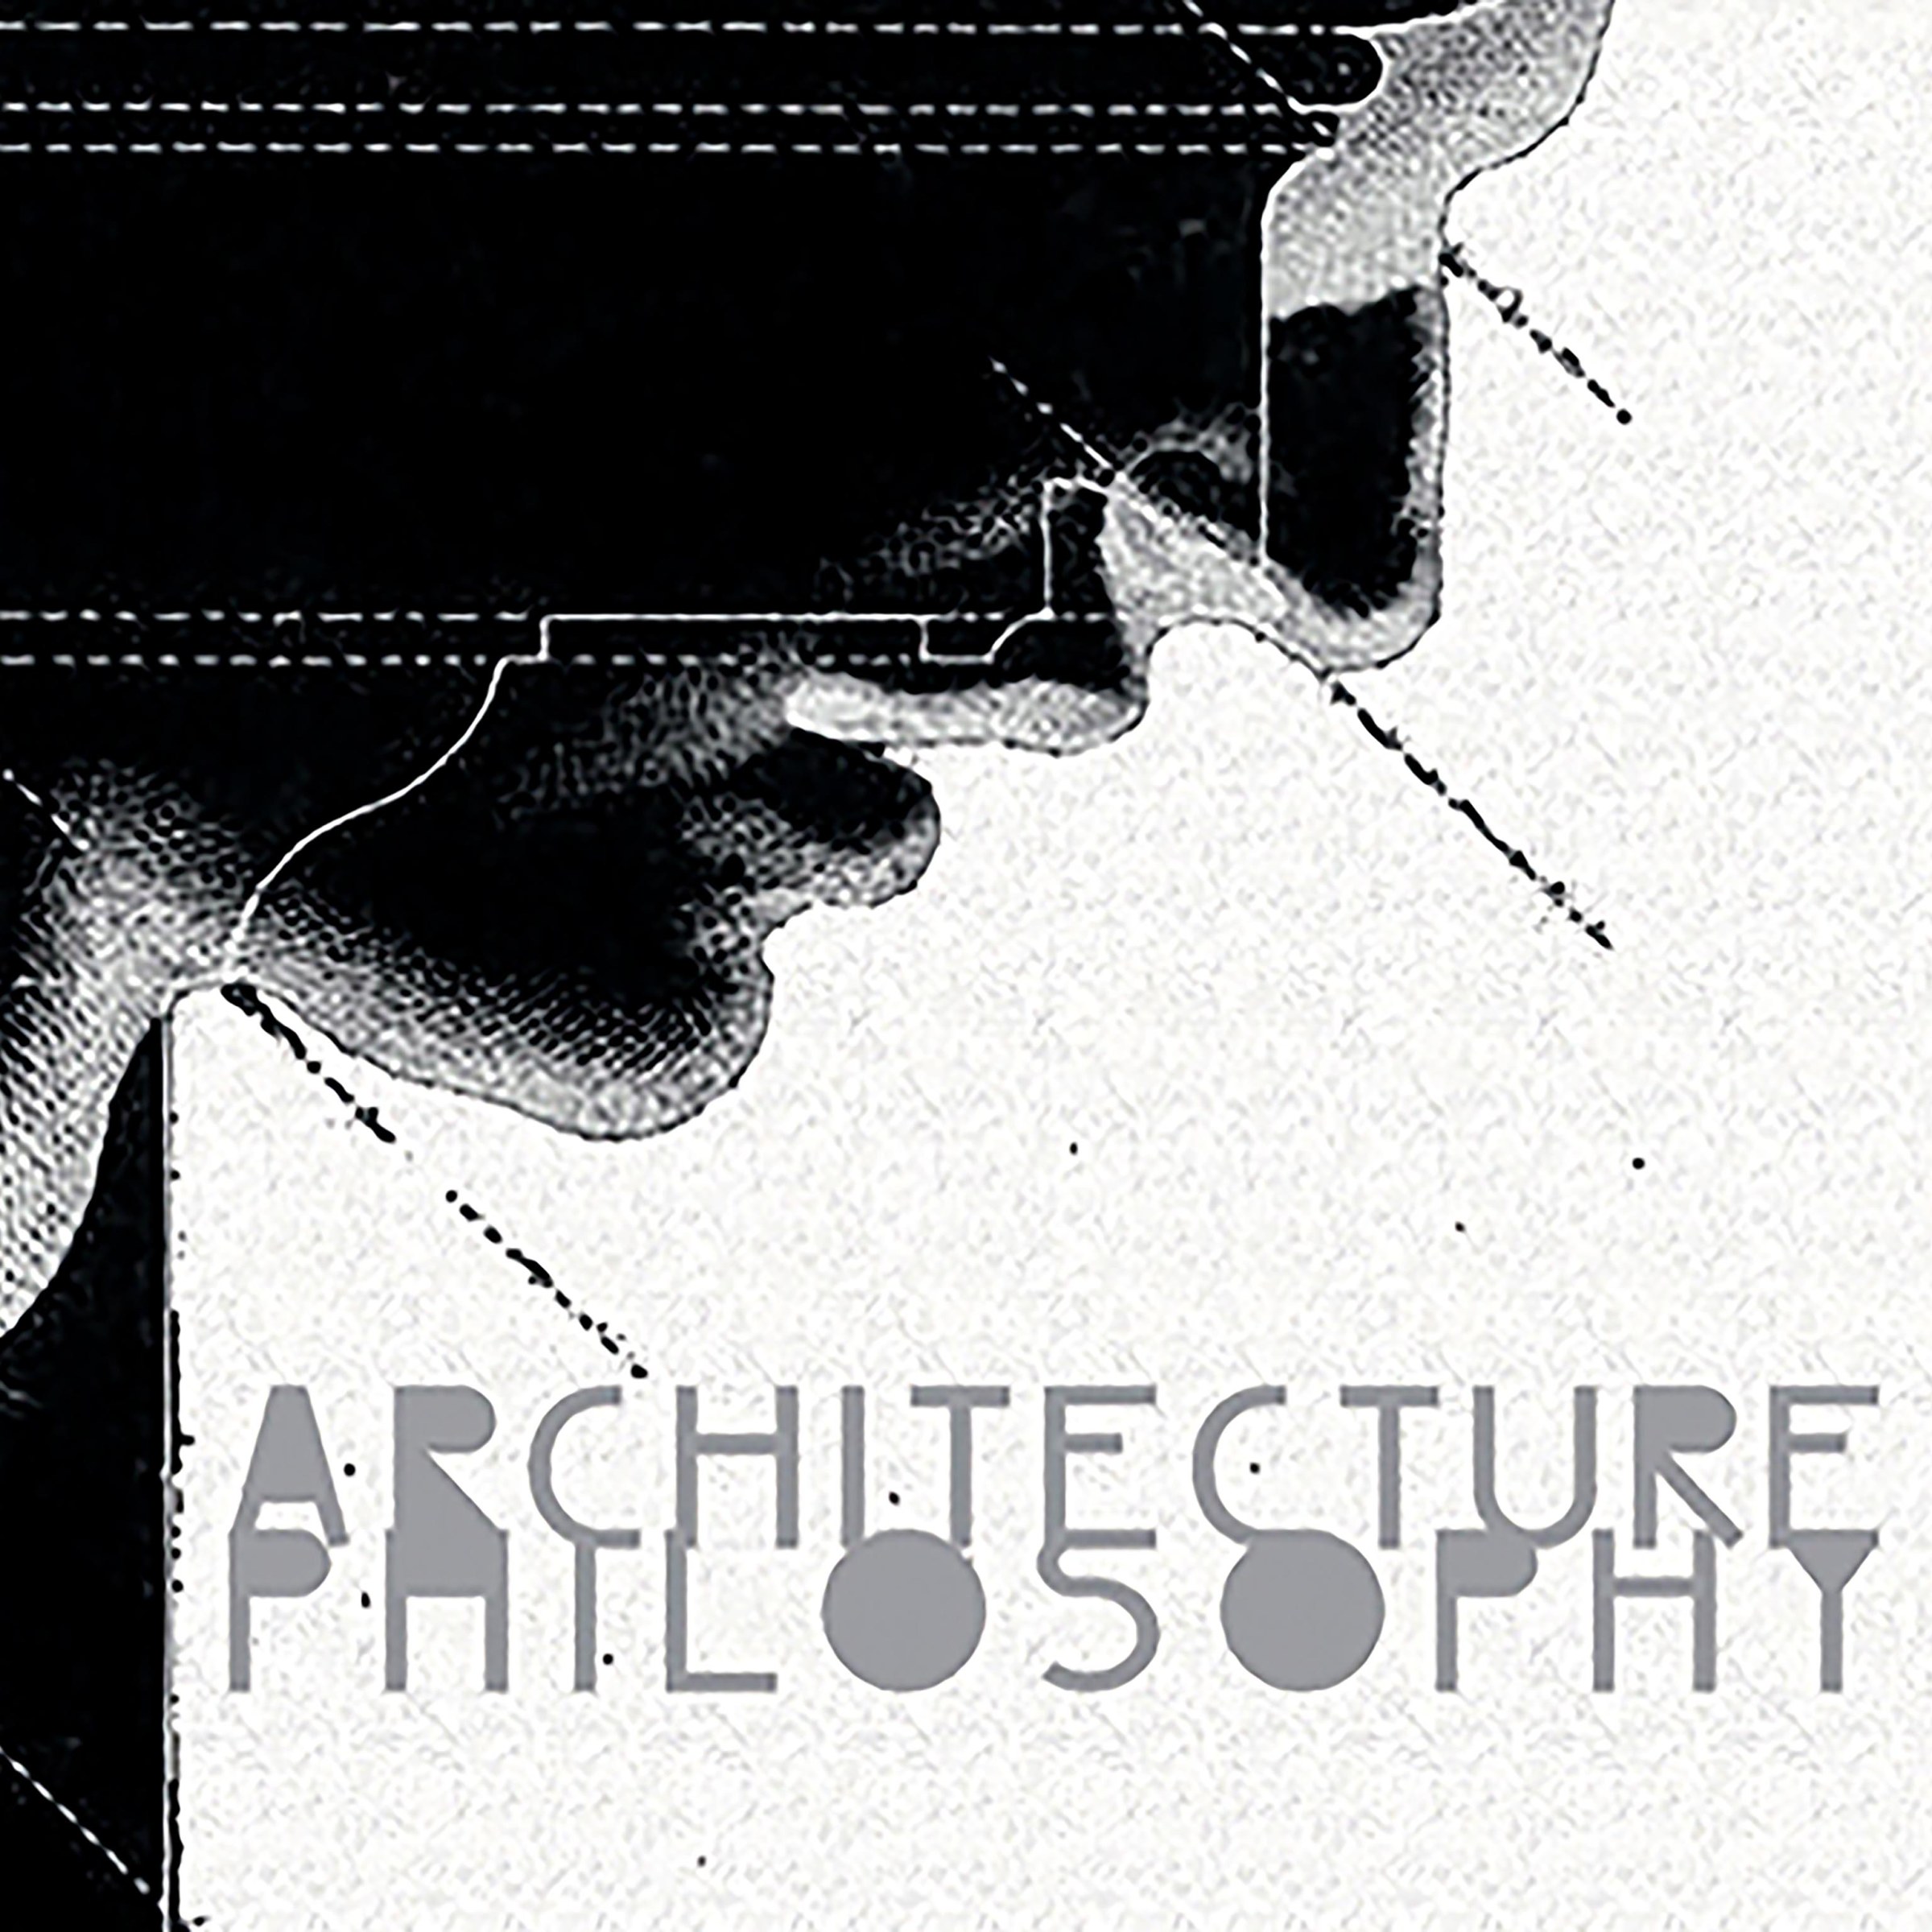 Cover of Architecture Philosophy journal 